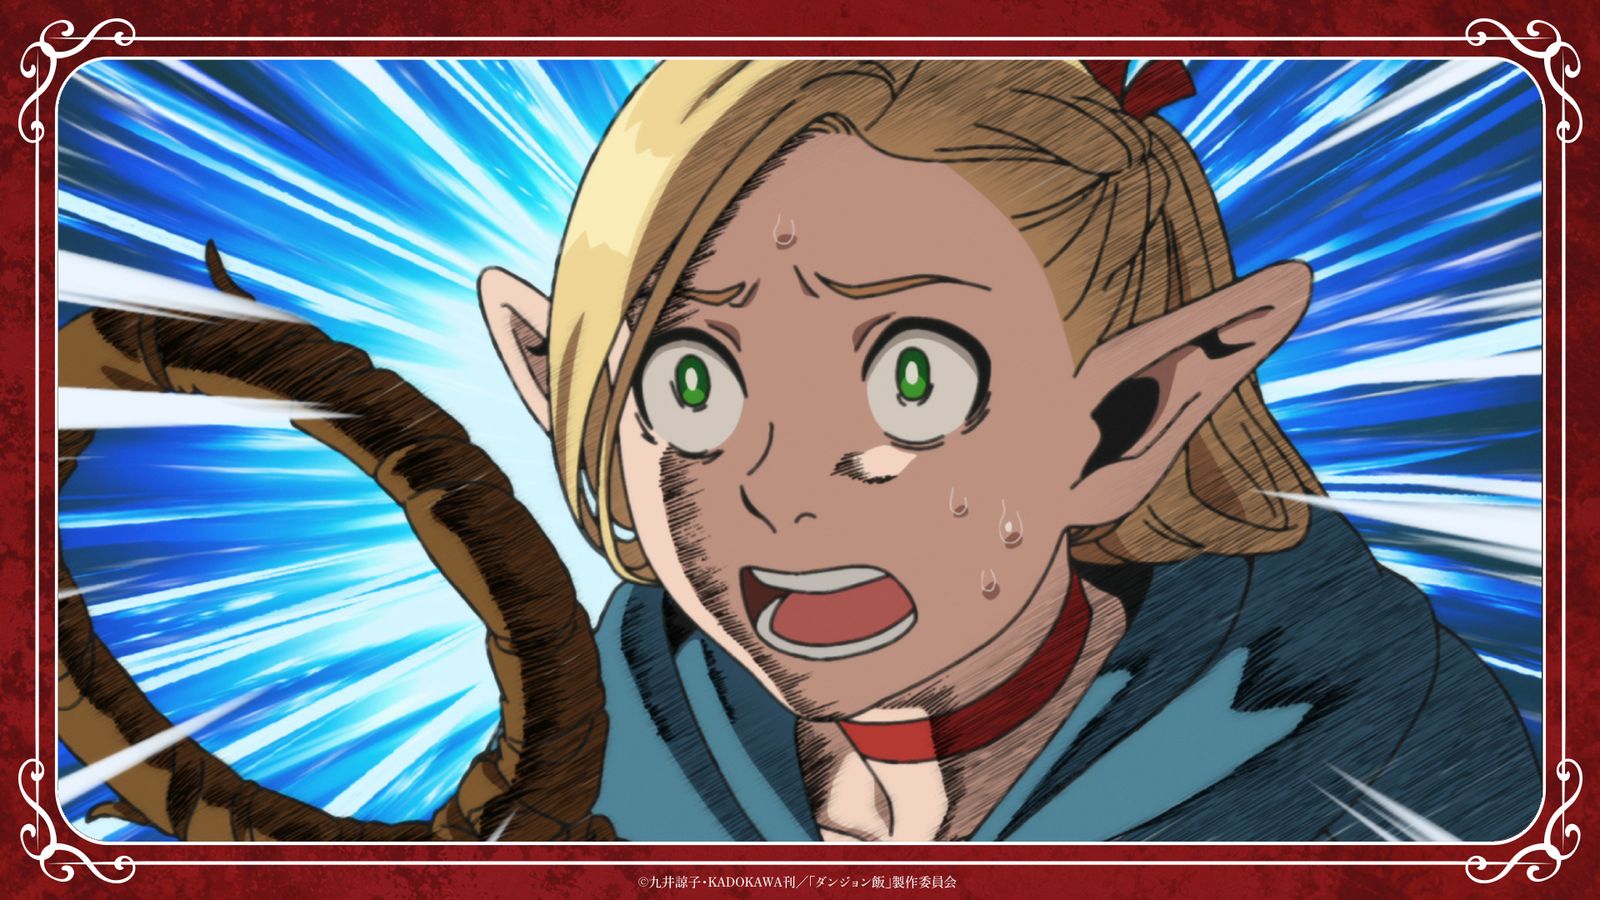 marcille hysterical moments delicious in dungeon